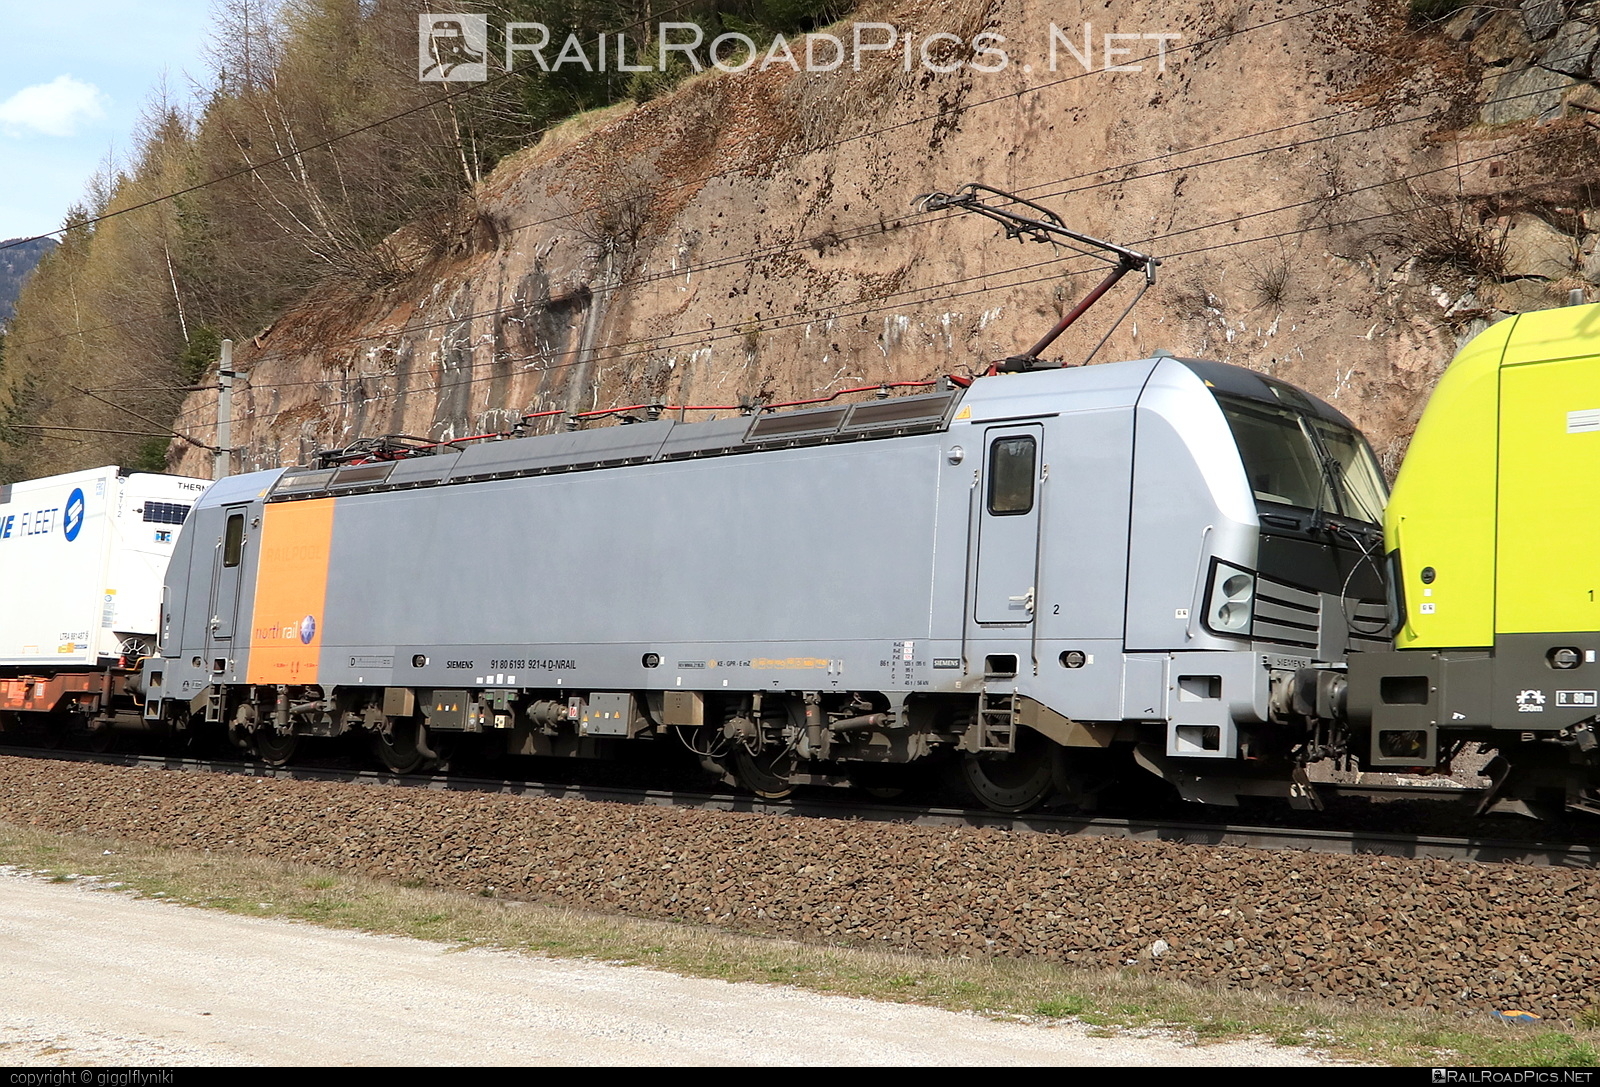 Siemens Vectron AC - 193 921 operated by northrail Faahrzeugverwaltungs GmbH #northrail #northrailFaahrzeugverwaltungsGmbH #siemens #siemensVectron #siemensVectronAC #vectron #vectronAC